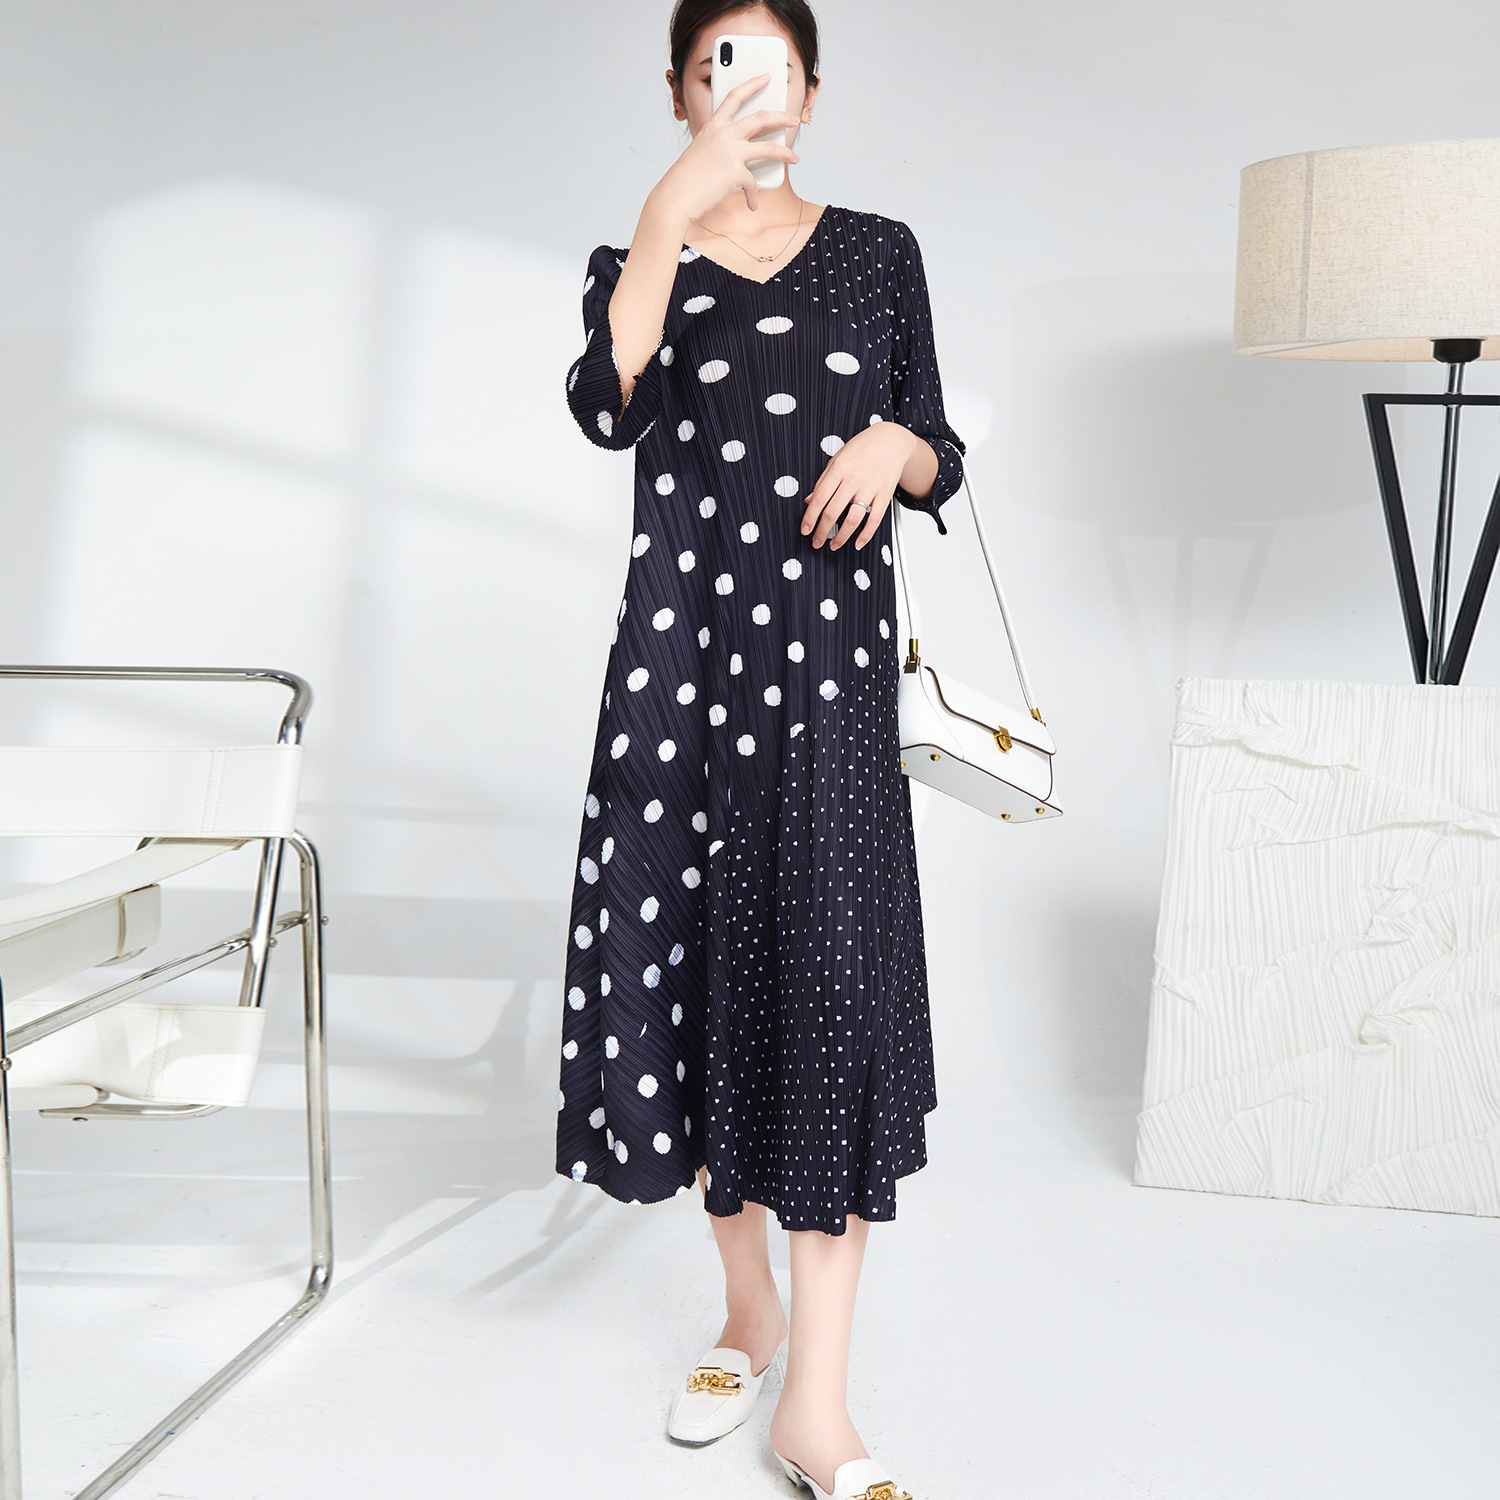 Casual Elegance for Everyday Wear lady's fashion Fashion Dresses Statement-making dresses for confident fashionistas